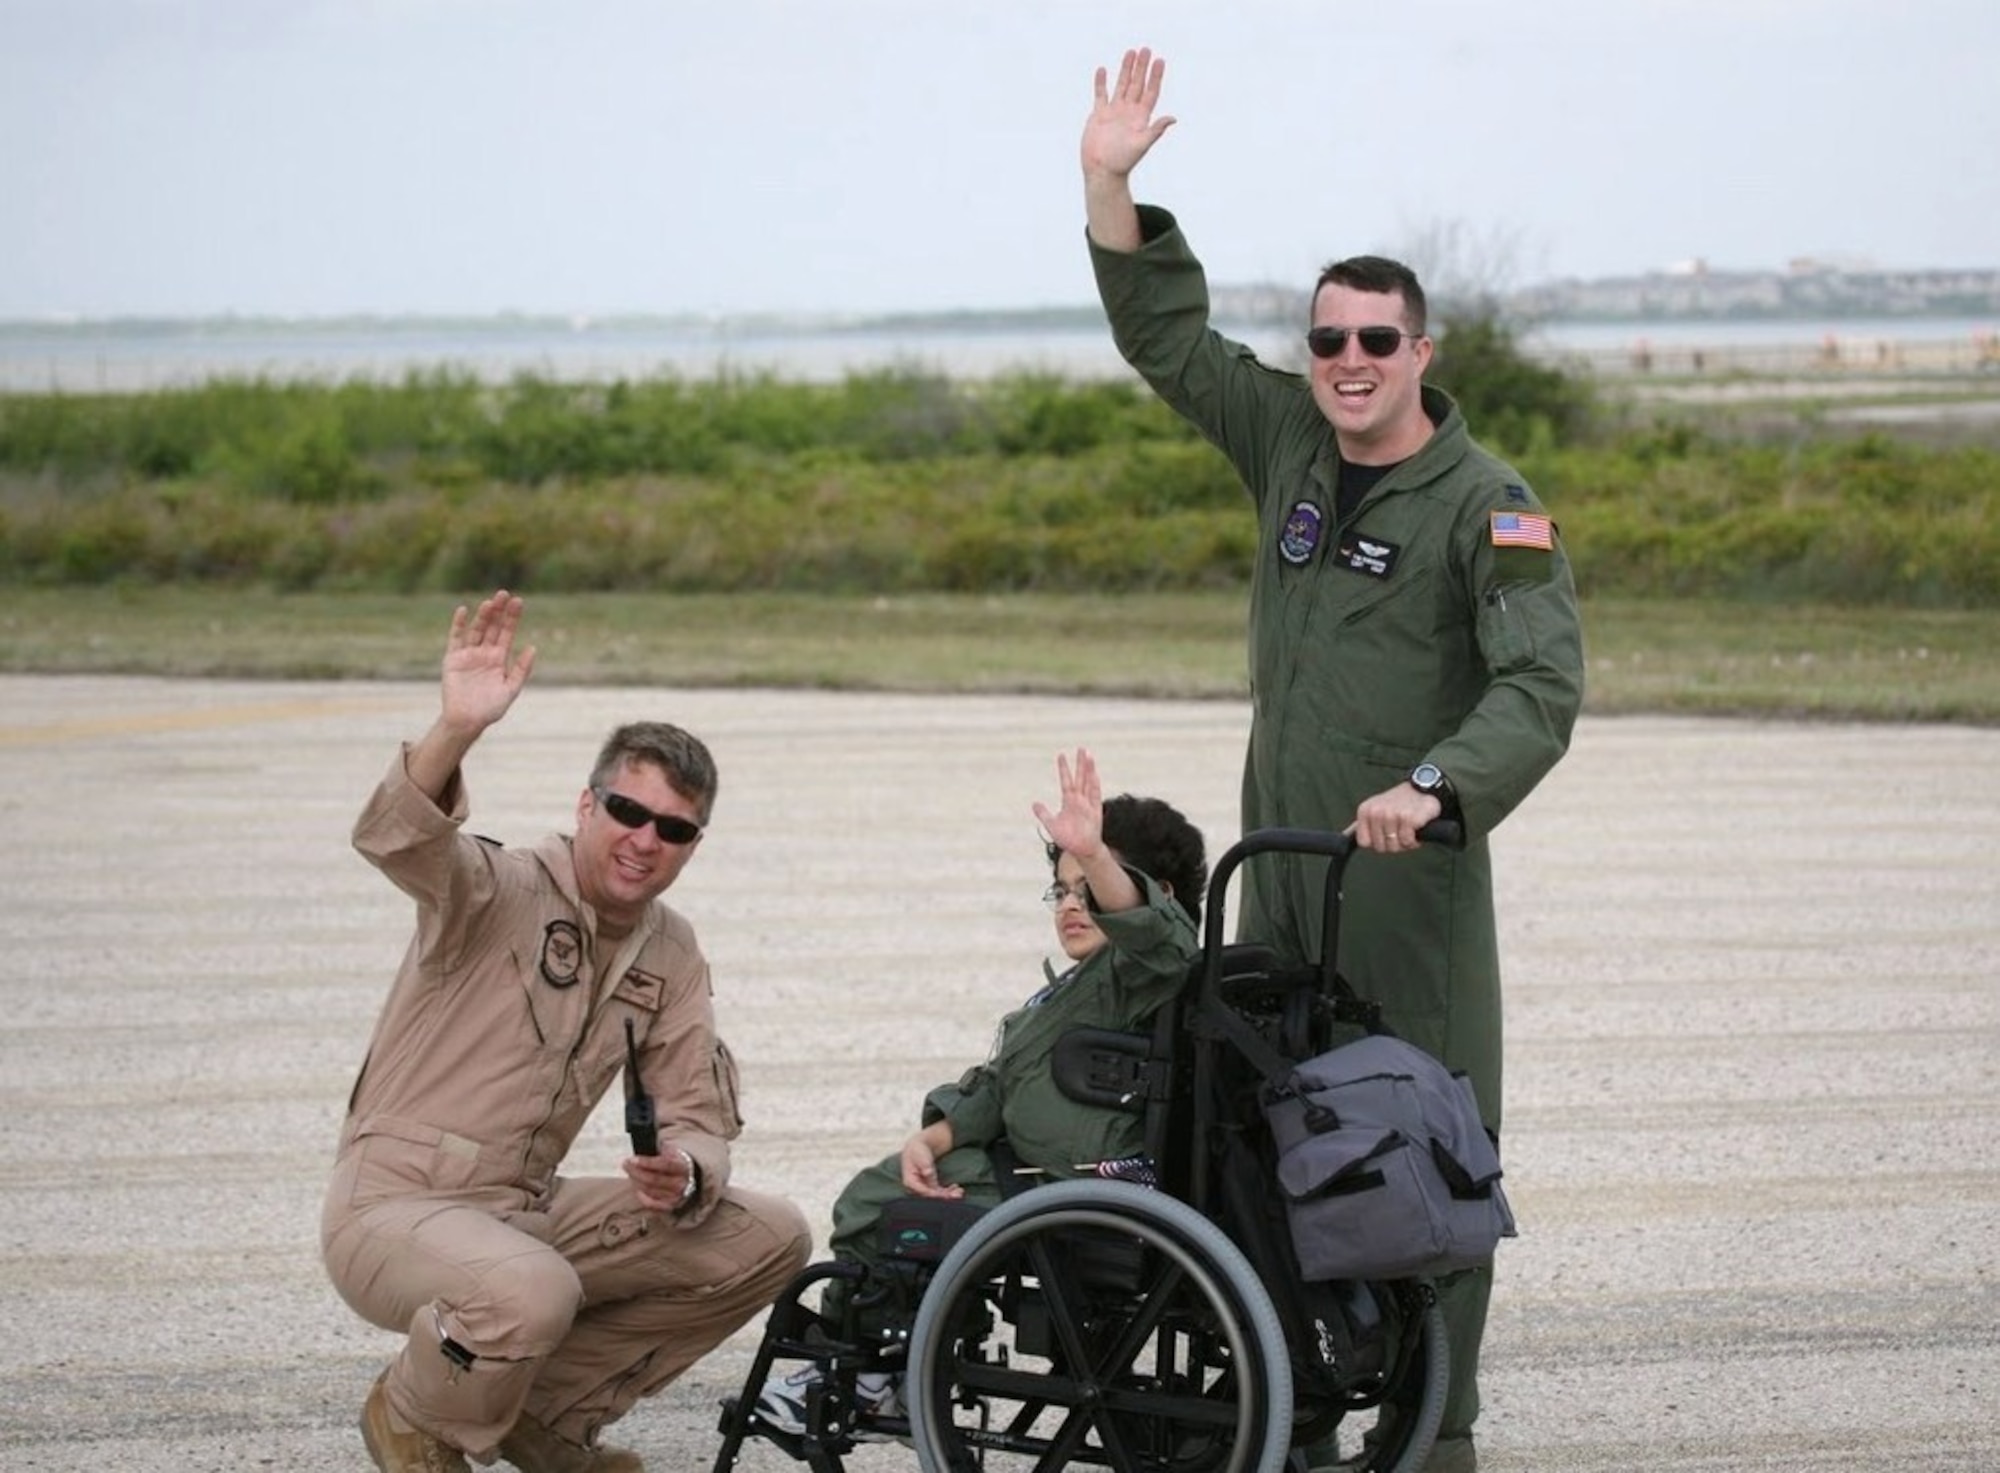 NAVAL AIR STATION CORPUS CHRISTI, Texas -- Navy Lt. Josh Lostetter, Pilot-For-A-Day Eric Davis and Air Force Capt. Tim Robinson wave at a passing B-52 from the 2d Bomb Wing’s 20th Bomb Squadron as it flies over the runway. When scheduling allows, the 2d Bomb Wing uses the missions to practice off-station low approaches while at the same time providing support for the Pilot-For-A-Day program. (U.S. Coast Guard photo by Charles Dekle)